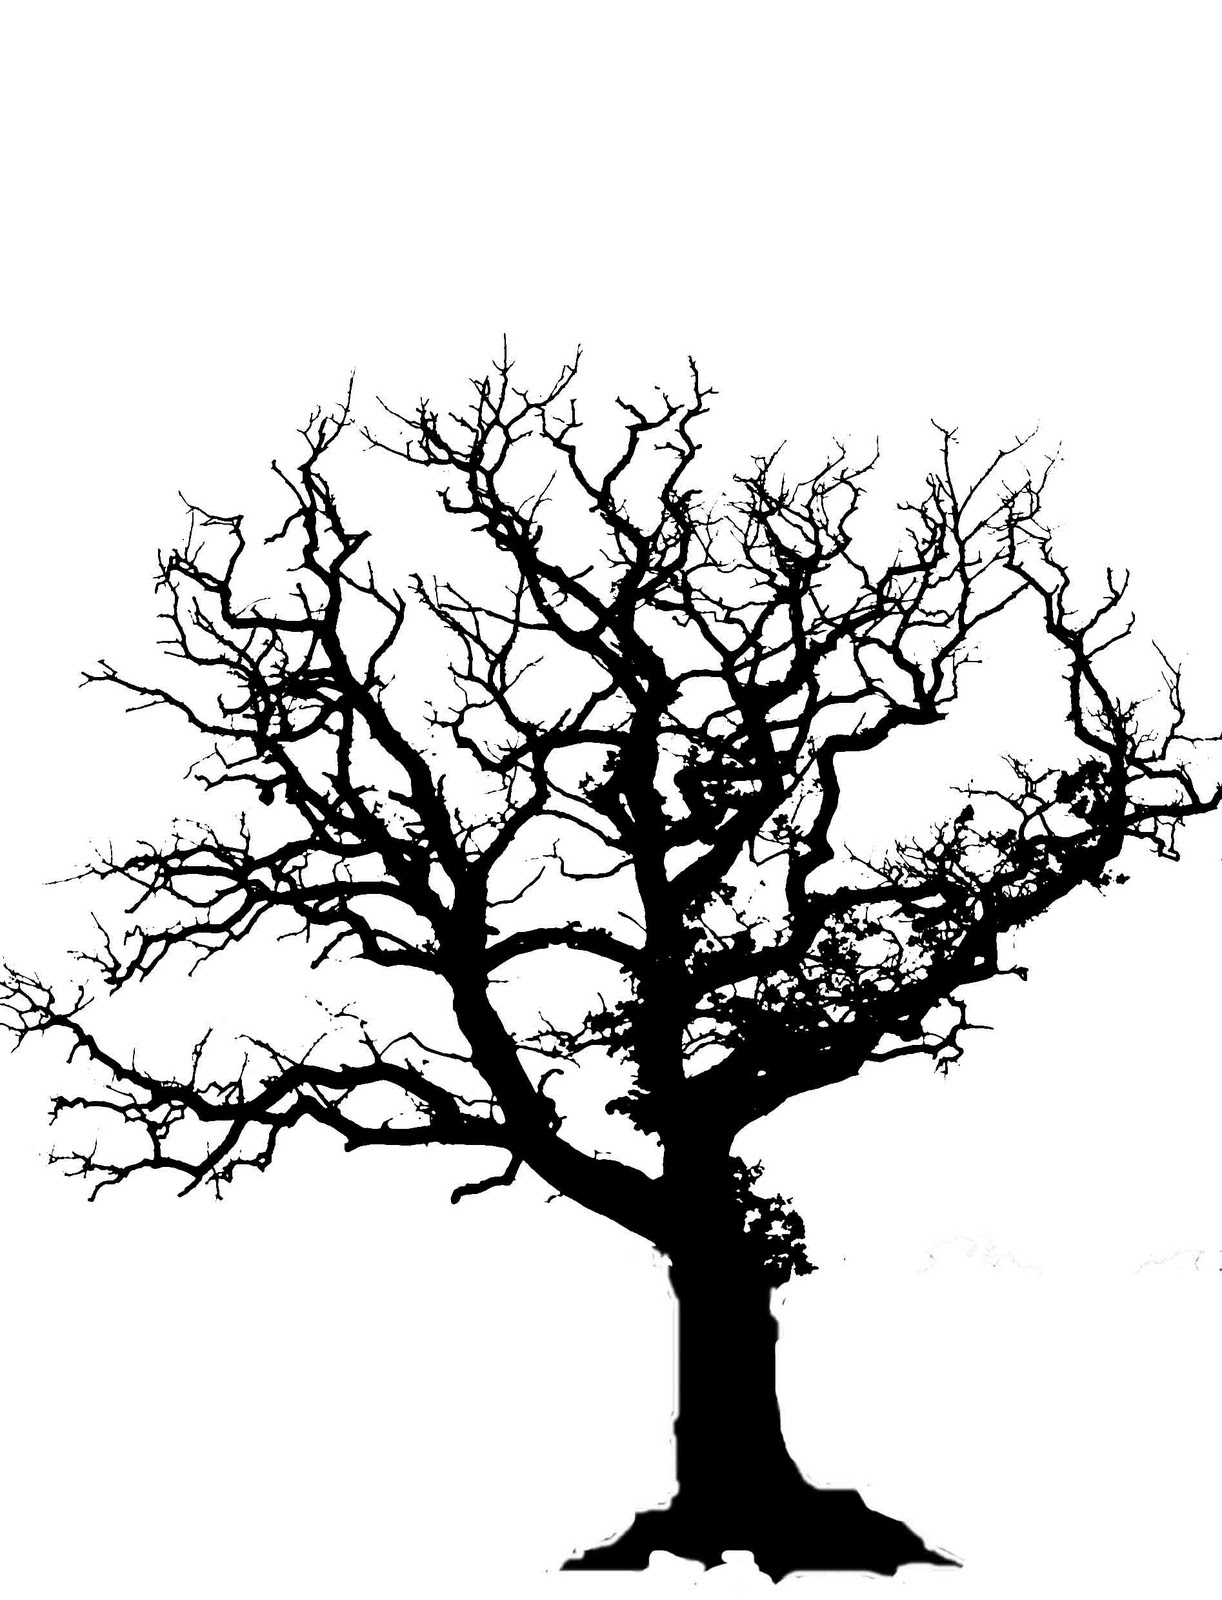 Bare Tree Sketch Free Cliparts That You Can Download To You Computer